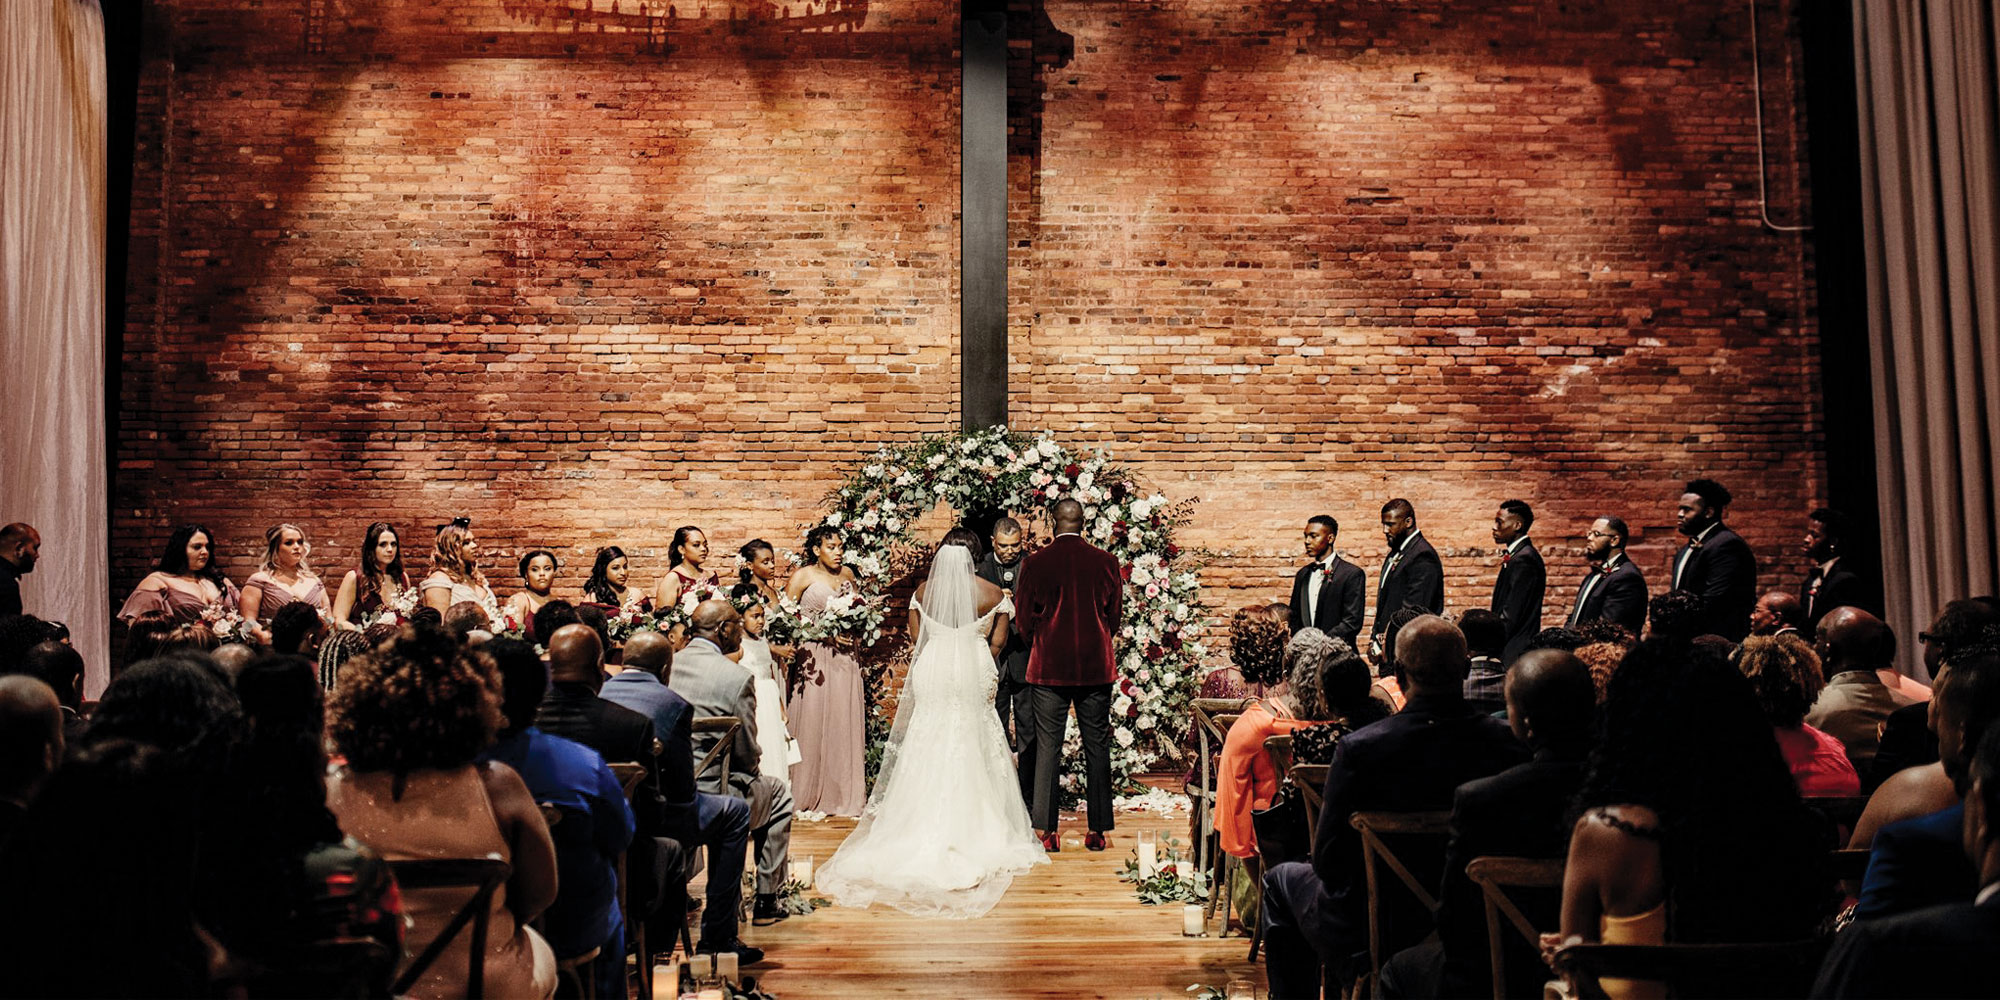 A wedding ceremony at Armature Works is staged in front of the building’s photogenic brick wall. Photo courtesy of Armature Works